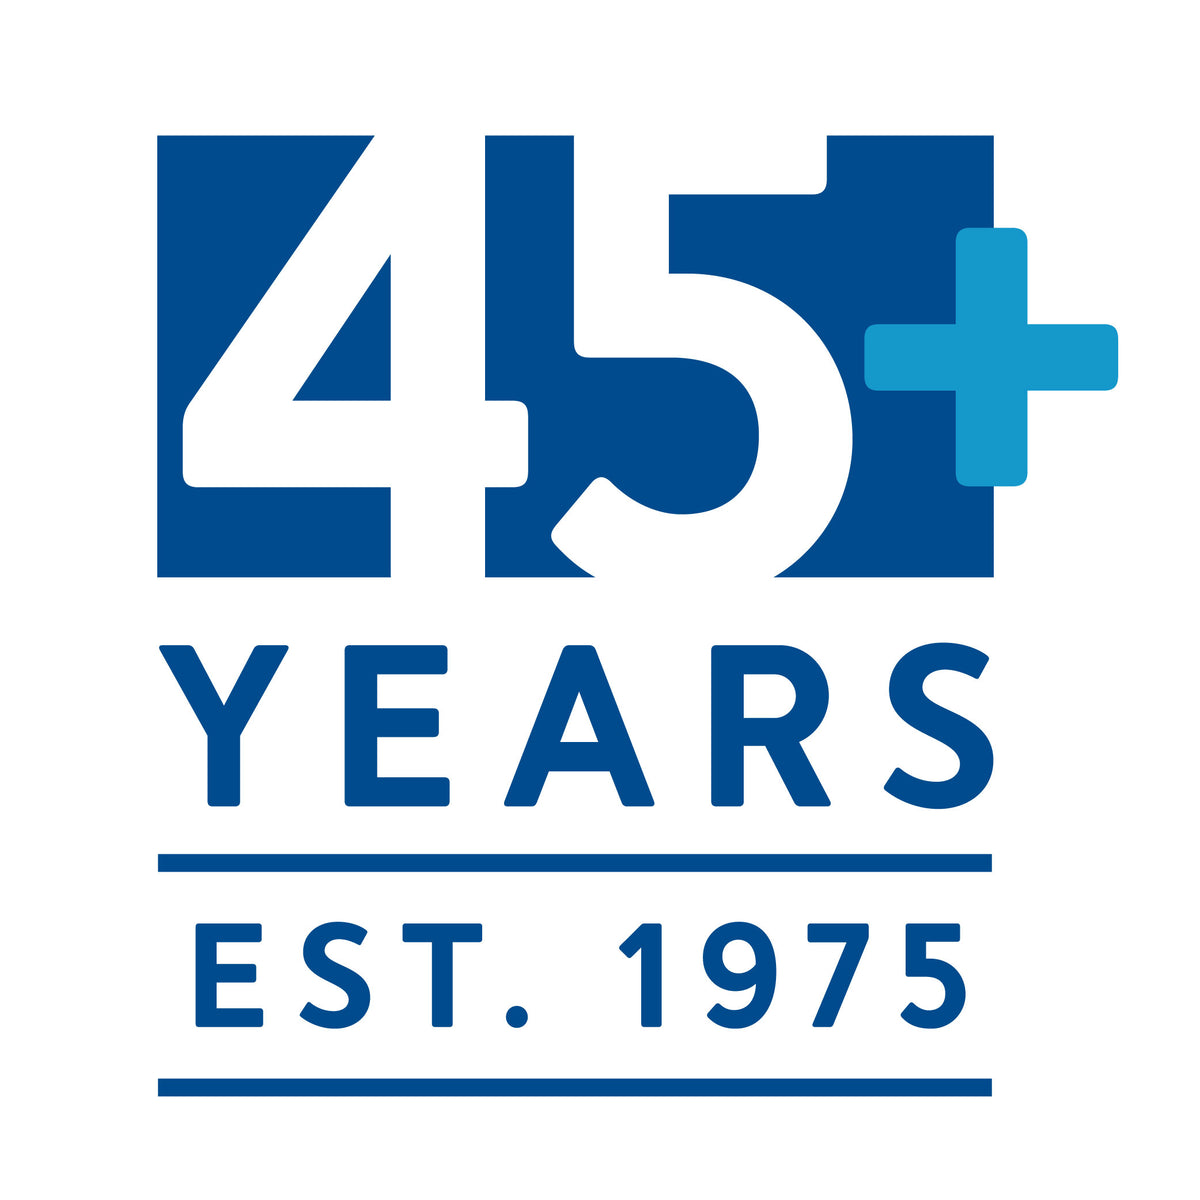 Since 1975, we've been a trusted leader in the health/wellness industry.